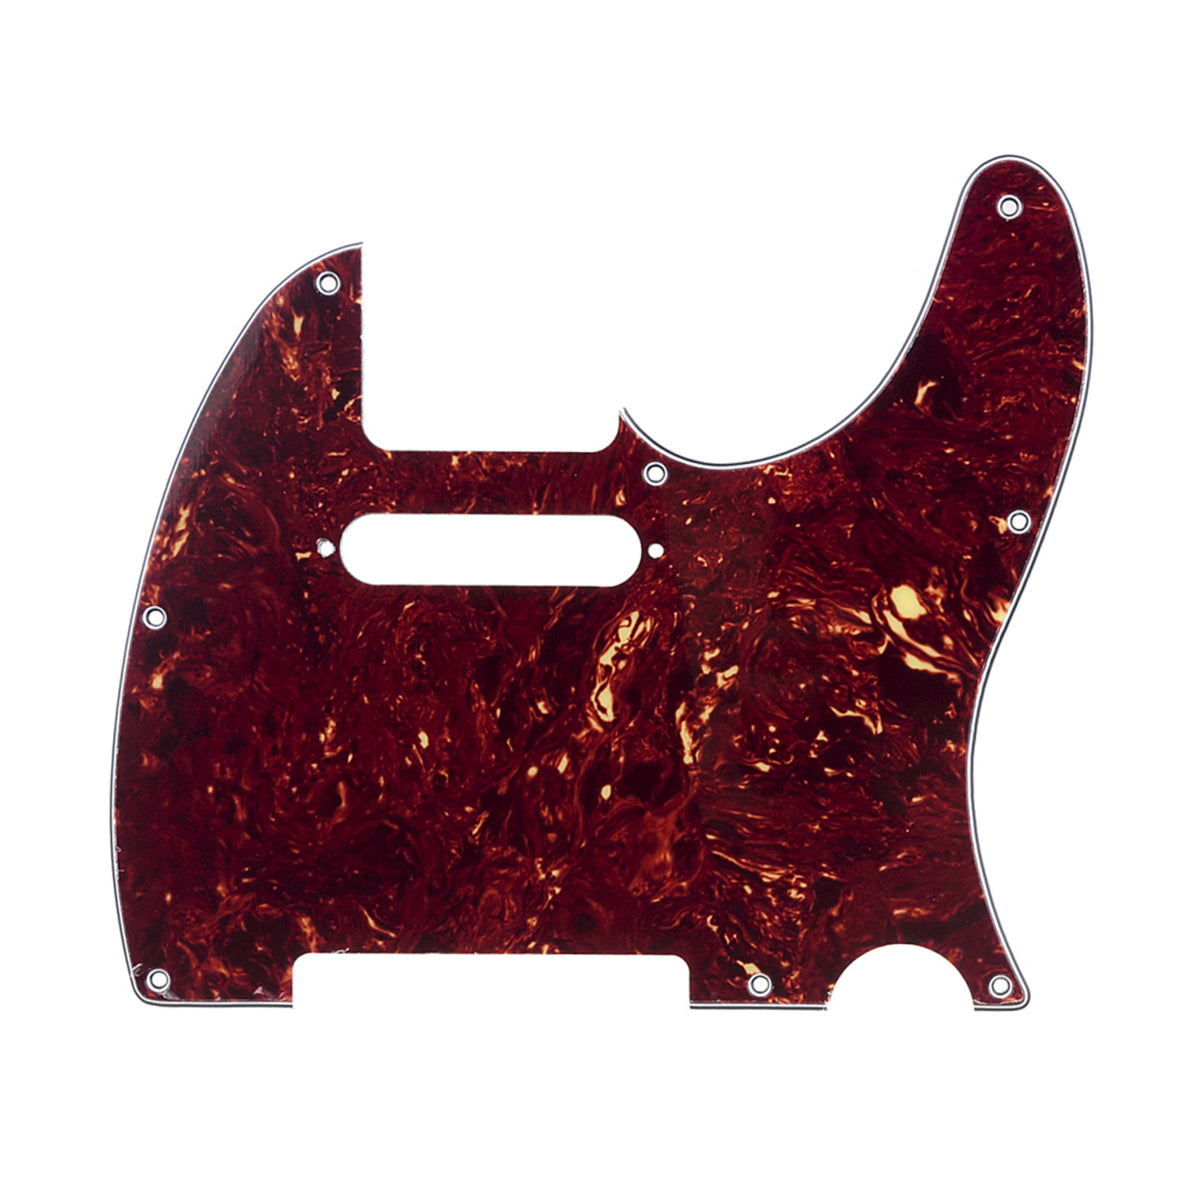 Musiclily 8 Hole Tele Guitar Pickguard for USA/Mexican Made Fender Standard Telecaster Modern Style, 4Ply Vintage Tortoise